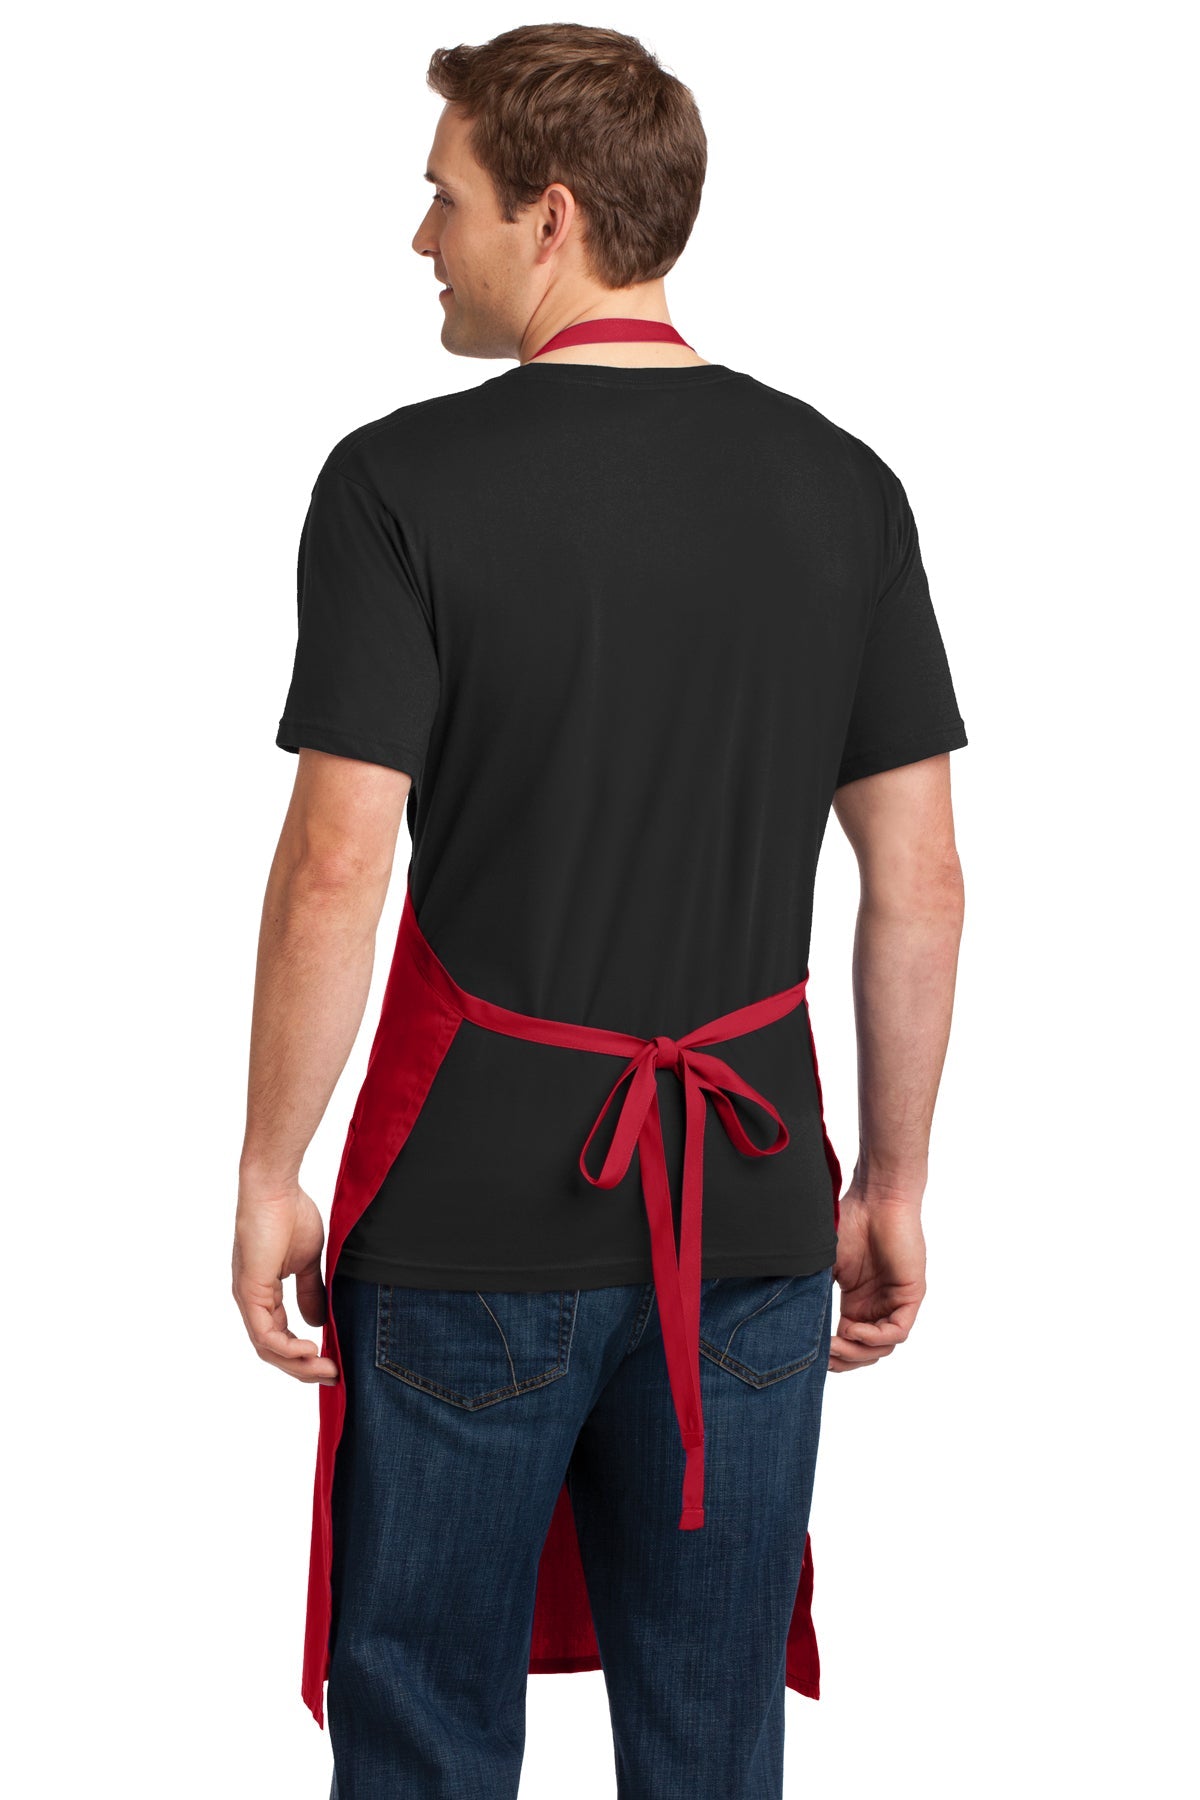 Port Authority Easy Care Customized Extra Long Bib Aprons with Stain Release, Red